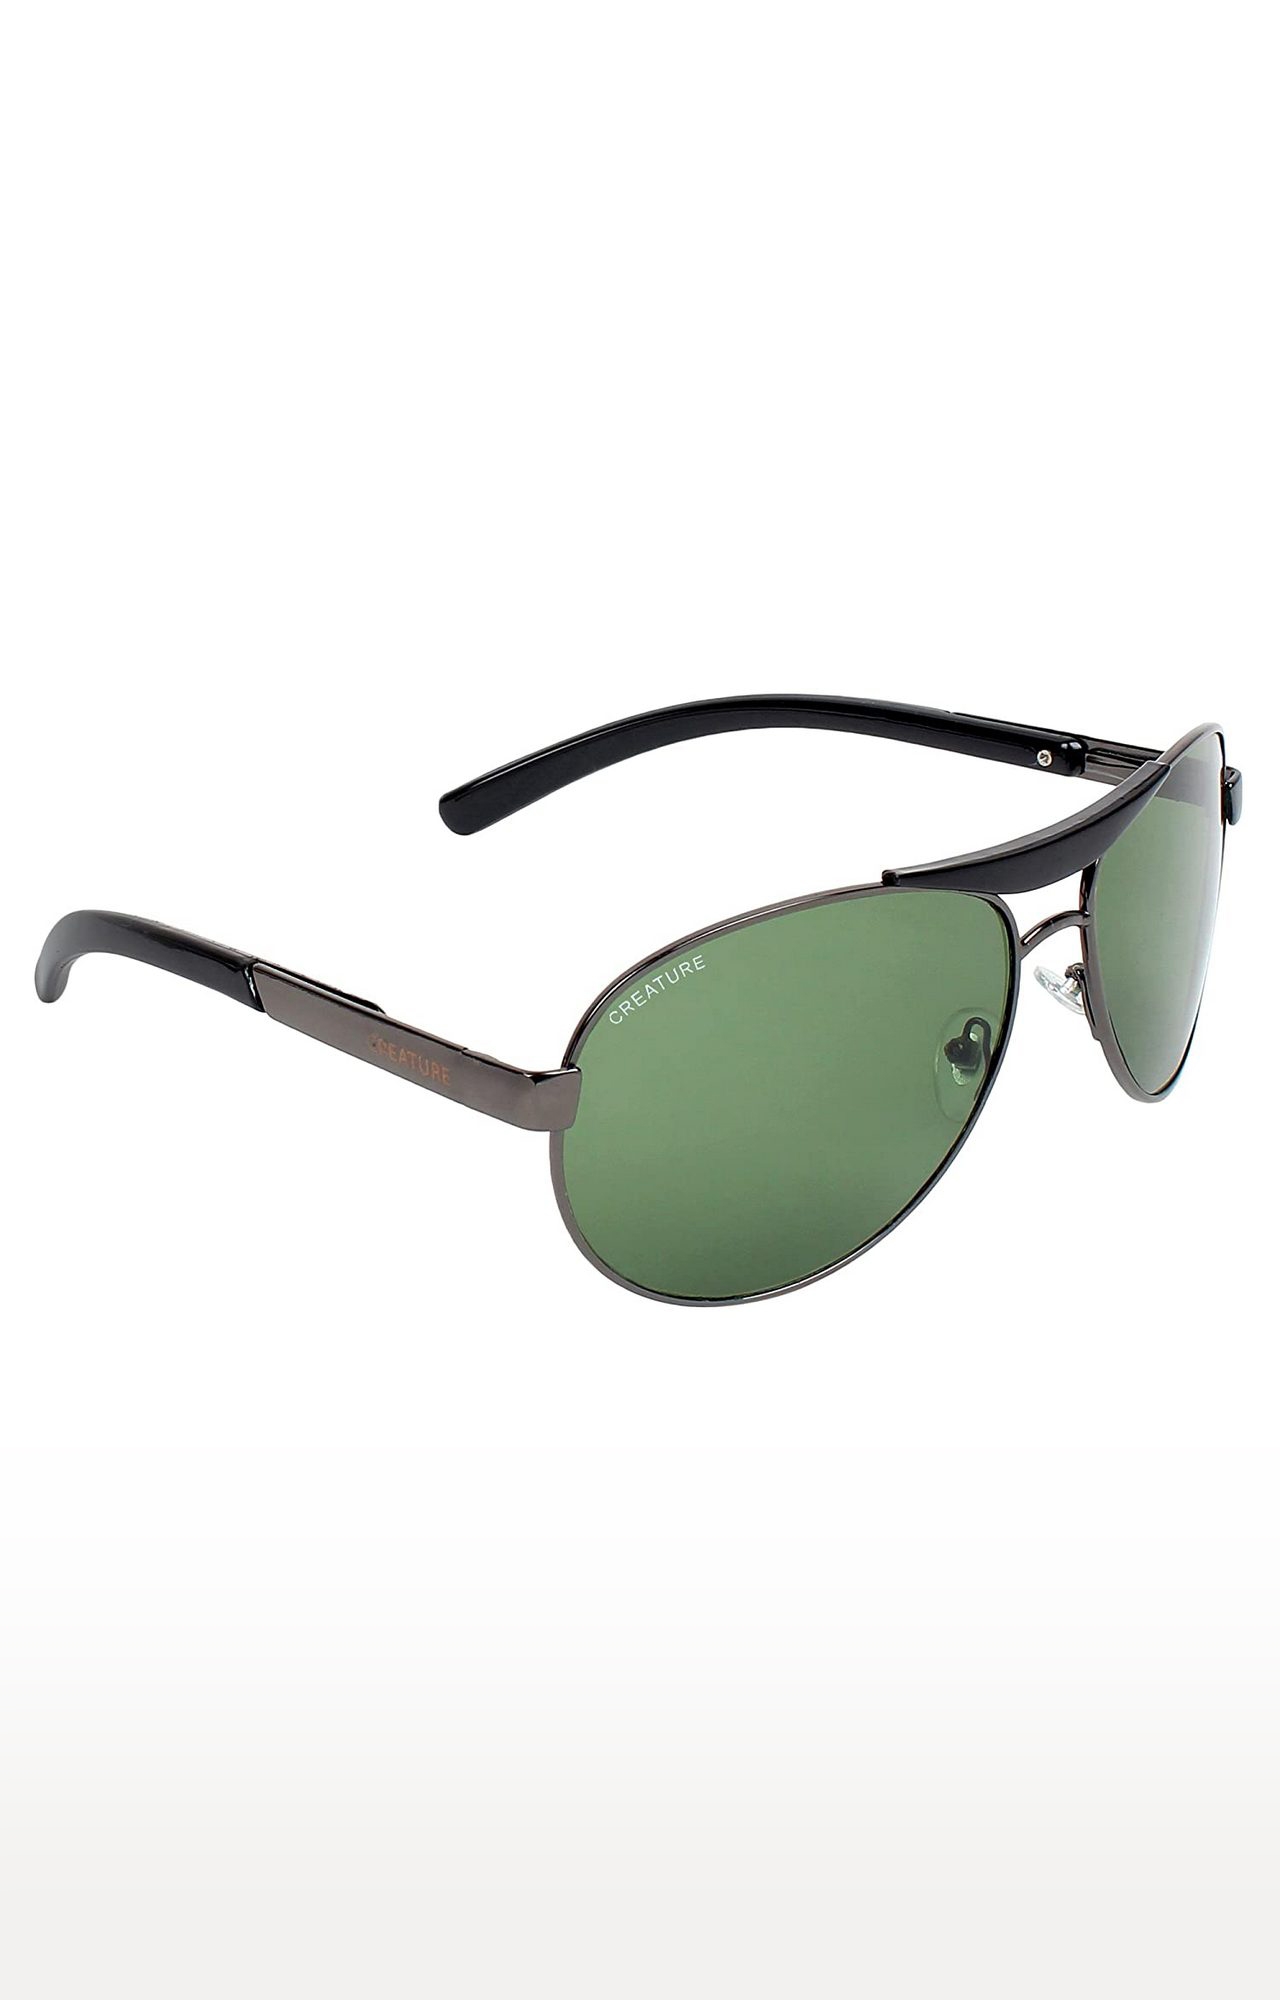 CREATURE | CREATURE Green & Brown Aviator Sunglasses Combo with UV Protection (Lens-Green & Brown|Frame-Black & Brown) 1